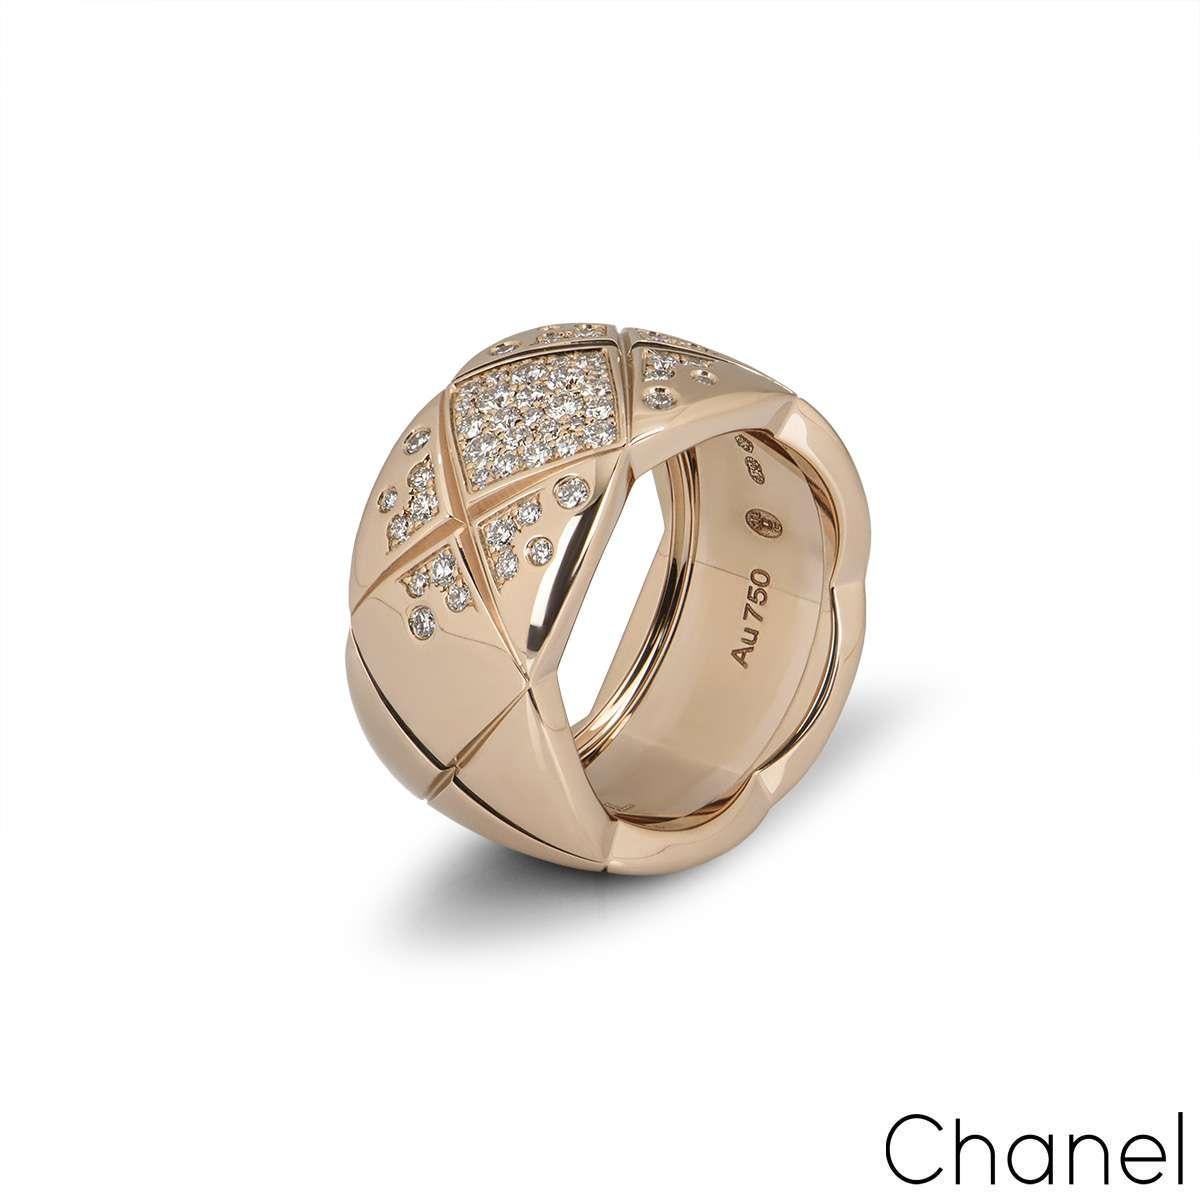 A beautiful 18k beige / rose gold diamond Chanel ring from the Coco Crush collection. The ring comprises of a quilted motif set with round brilliant cut diamonds in the centre of the ring. The diamonds have a total weight of 0.46. The ring measures